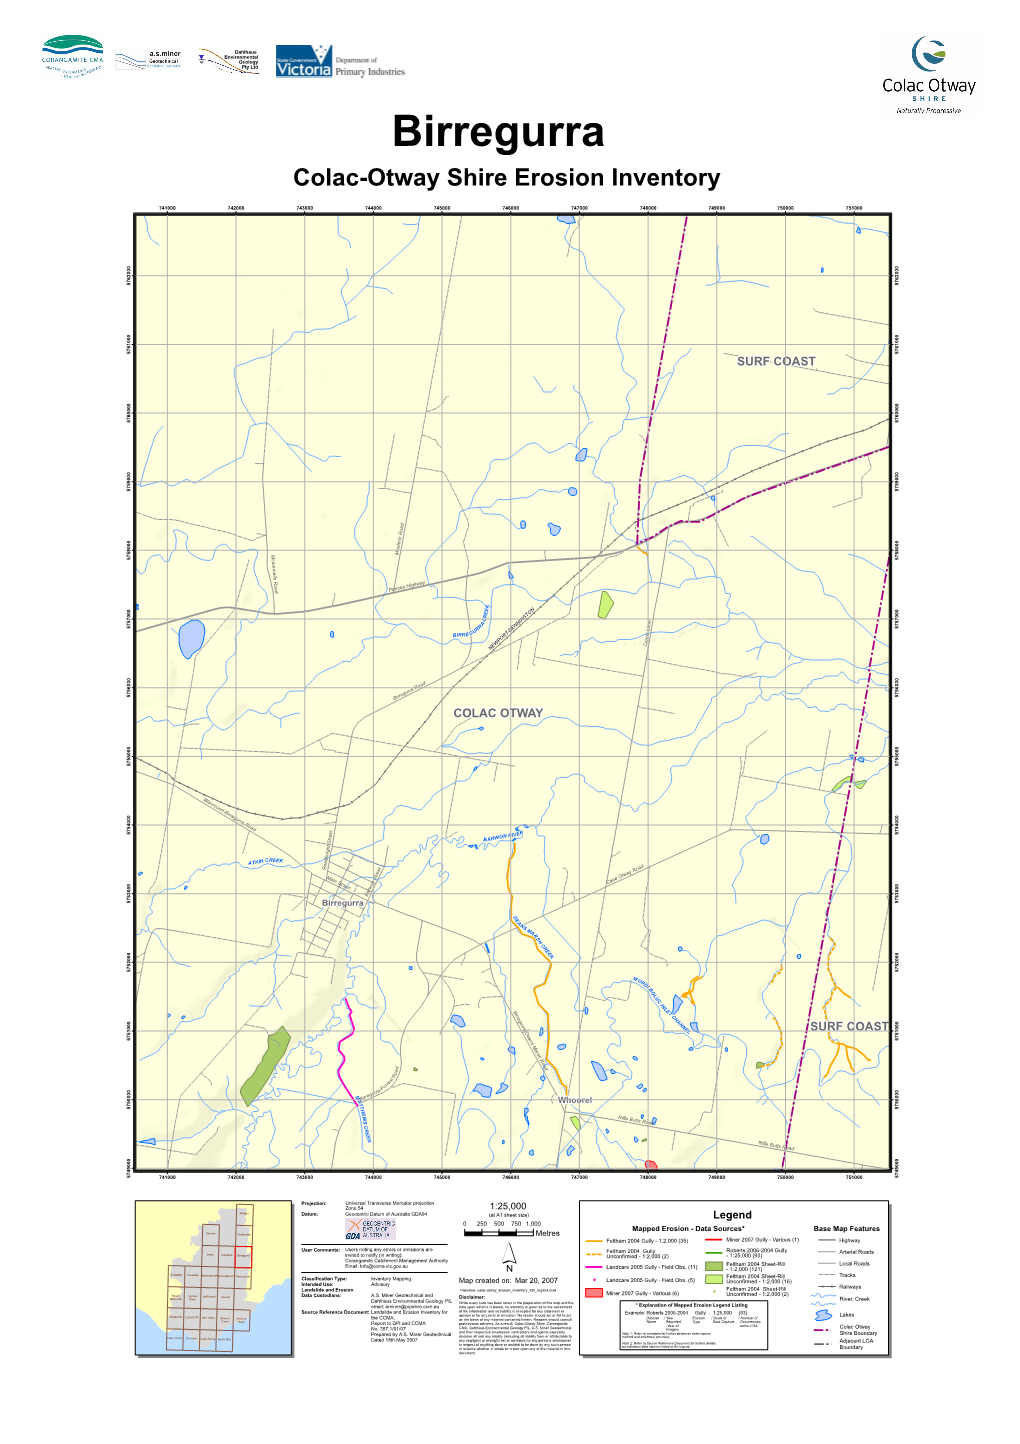 Colac-Otway Shire Erosion Inventory